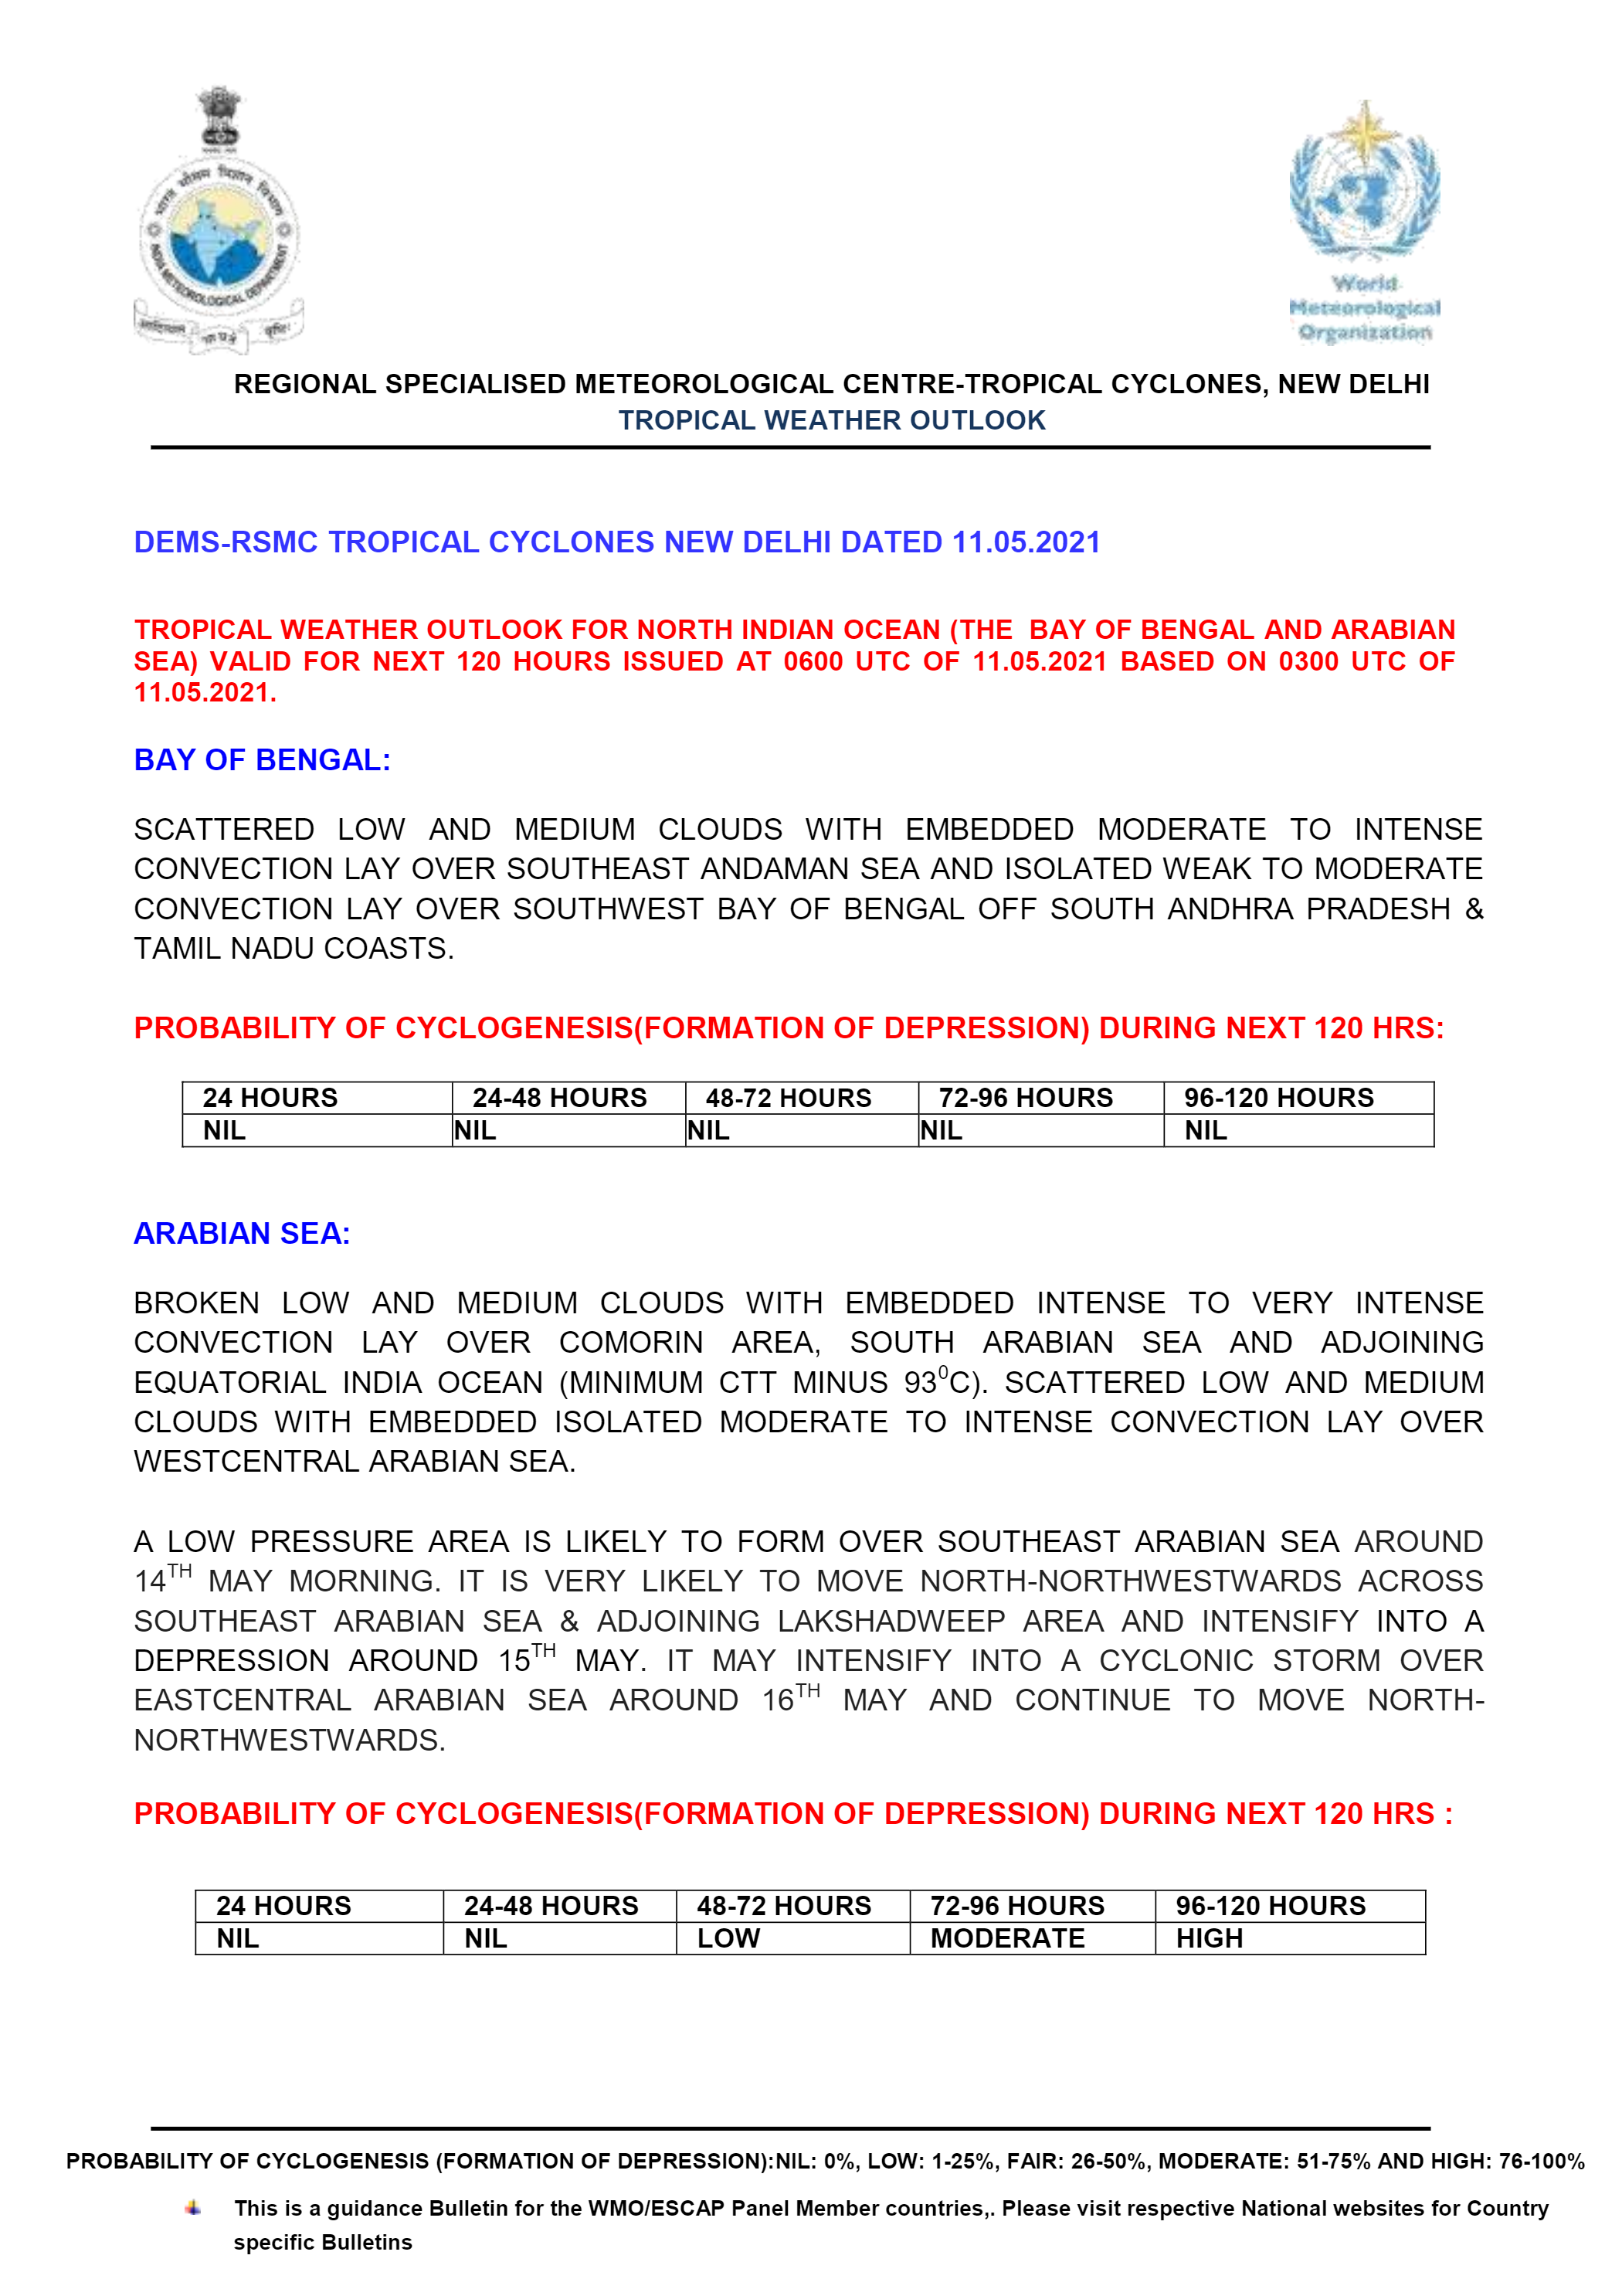 1_Tropical Weather Outlook based on  0300 UTC of 11.05.2021_609a4399421bb.png